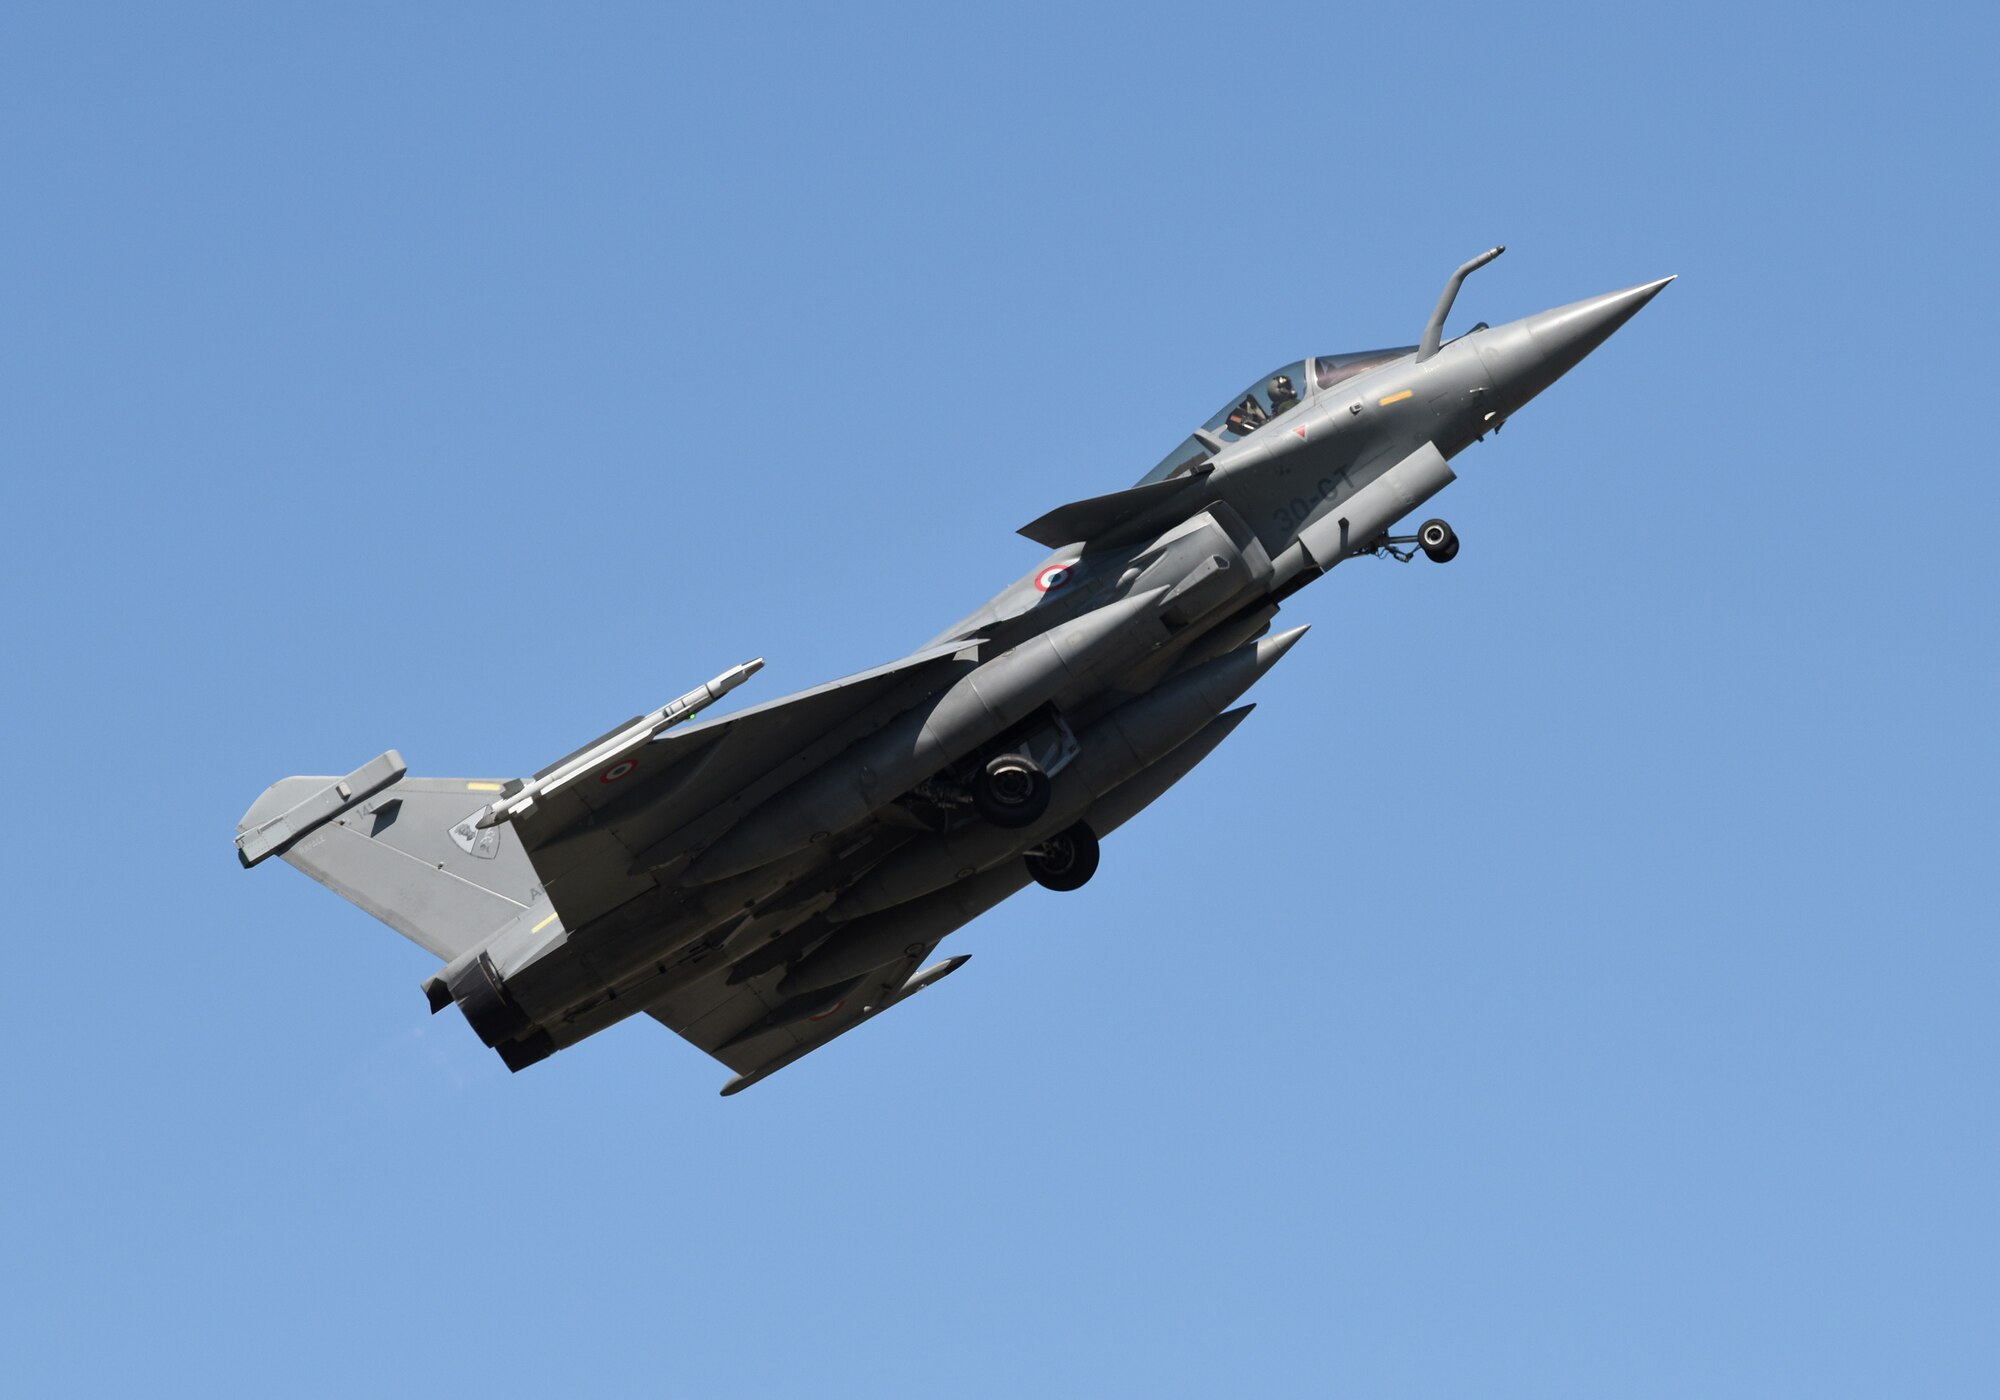 A French Air Force Rafale takes off to participate in exercise Point Blank at Royal Air Force Lakenheath, England, June 27, 2019. Training exercises with NATO allies reinforce and enhance deterrence and combined defense capabilities. (U.S. Air Force photo by Airman 1st Class Rhonda Smith)